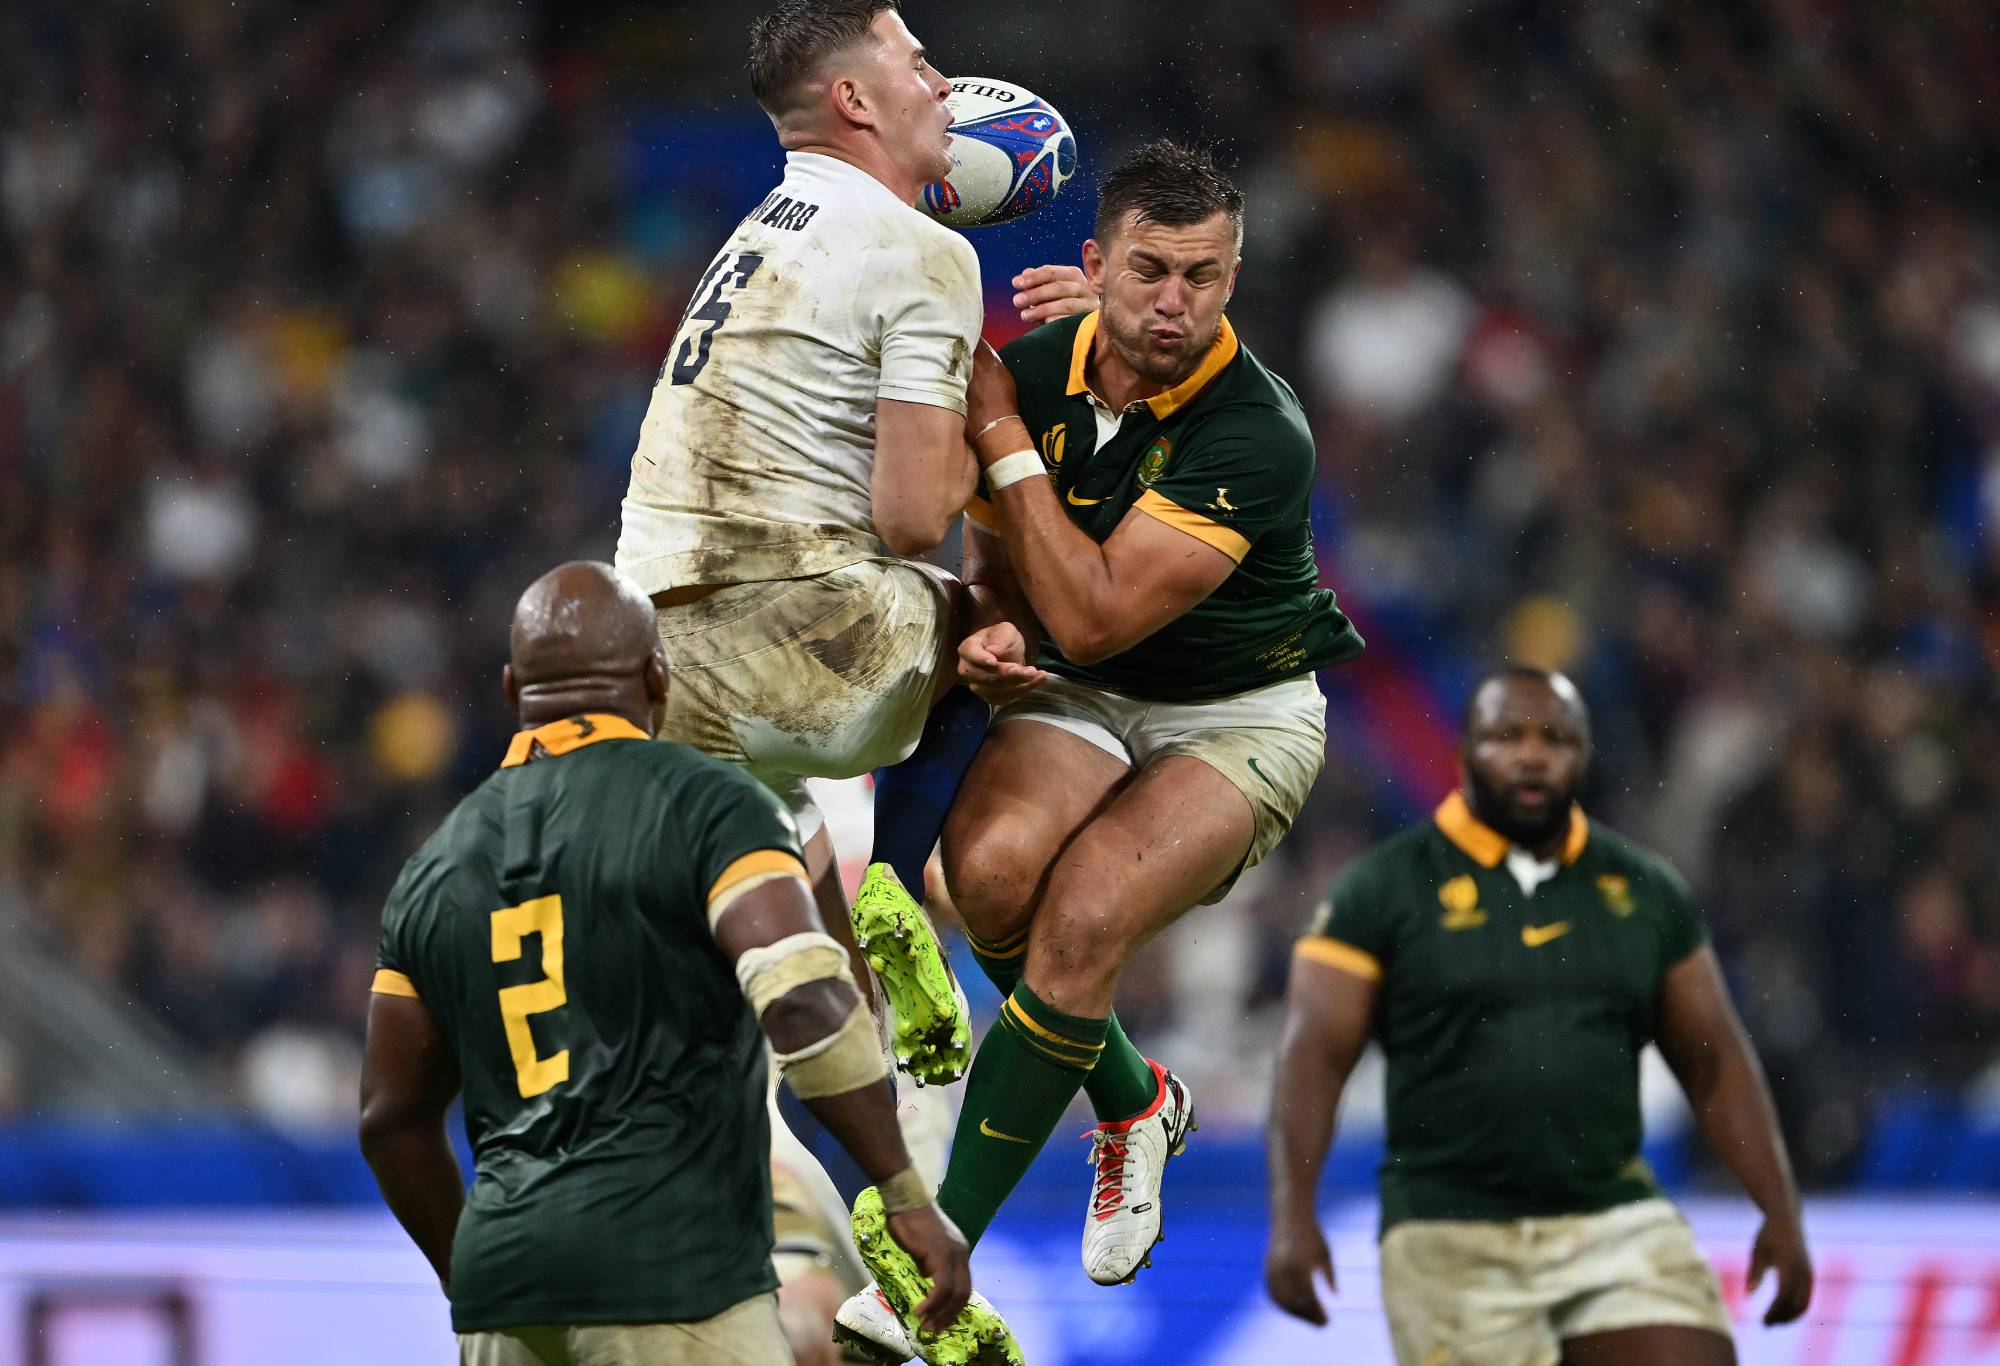 Freddie Steward of England challenges Handre Pollard of South Africa for a high ball during the Rugby World Cup France 2023 semi final match between England and South Africa at Stade de France on October 21, 2023 in Paris, France. (Photo by Dan Mullan/Getty Images)